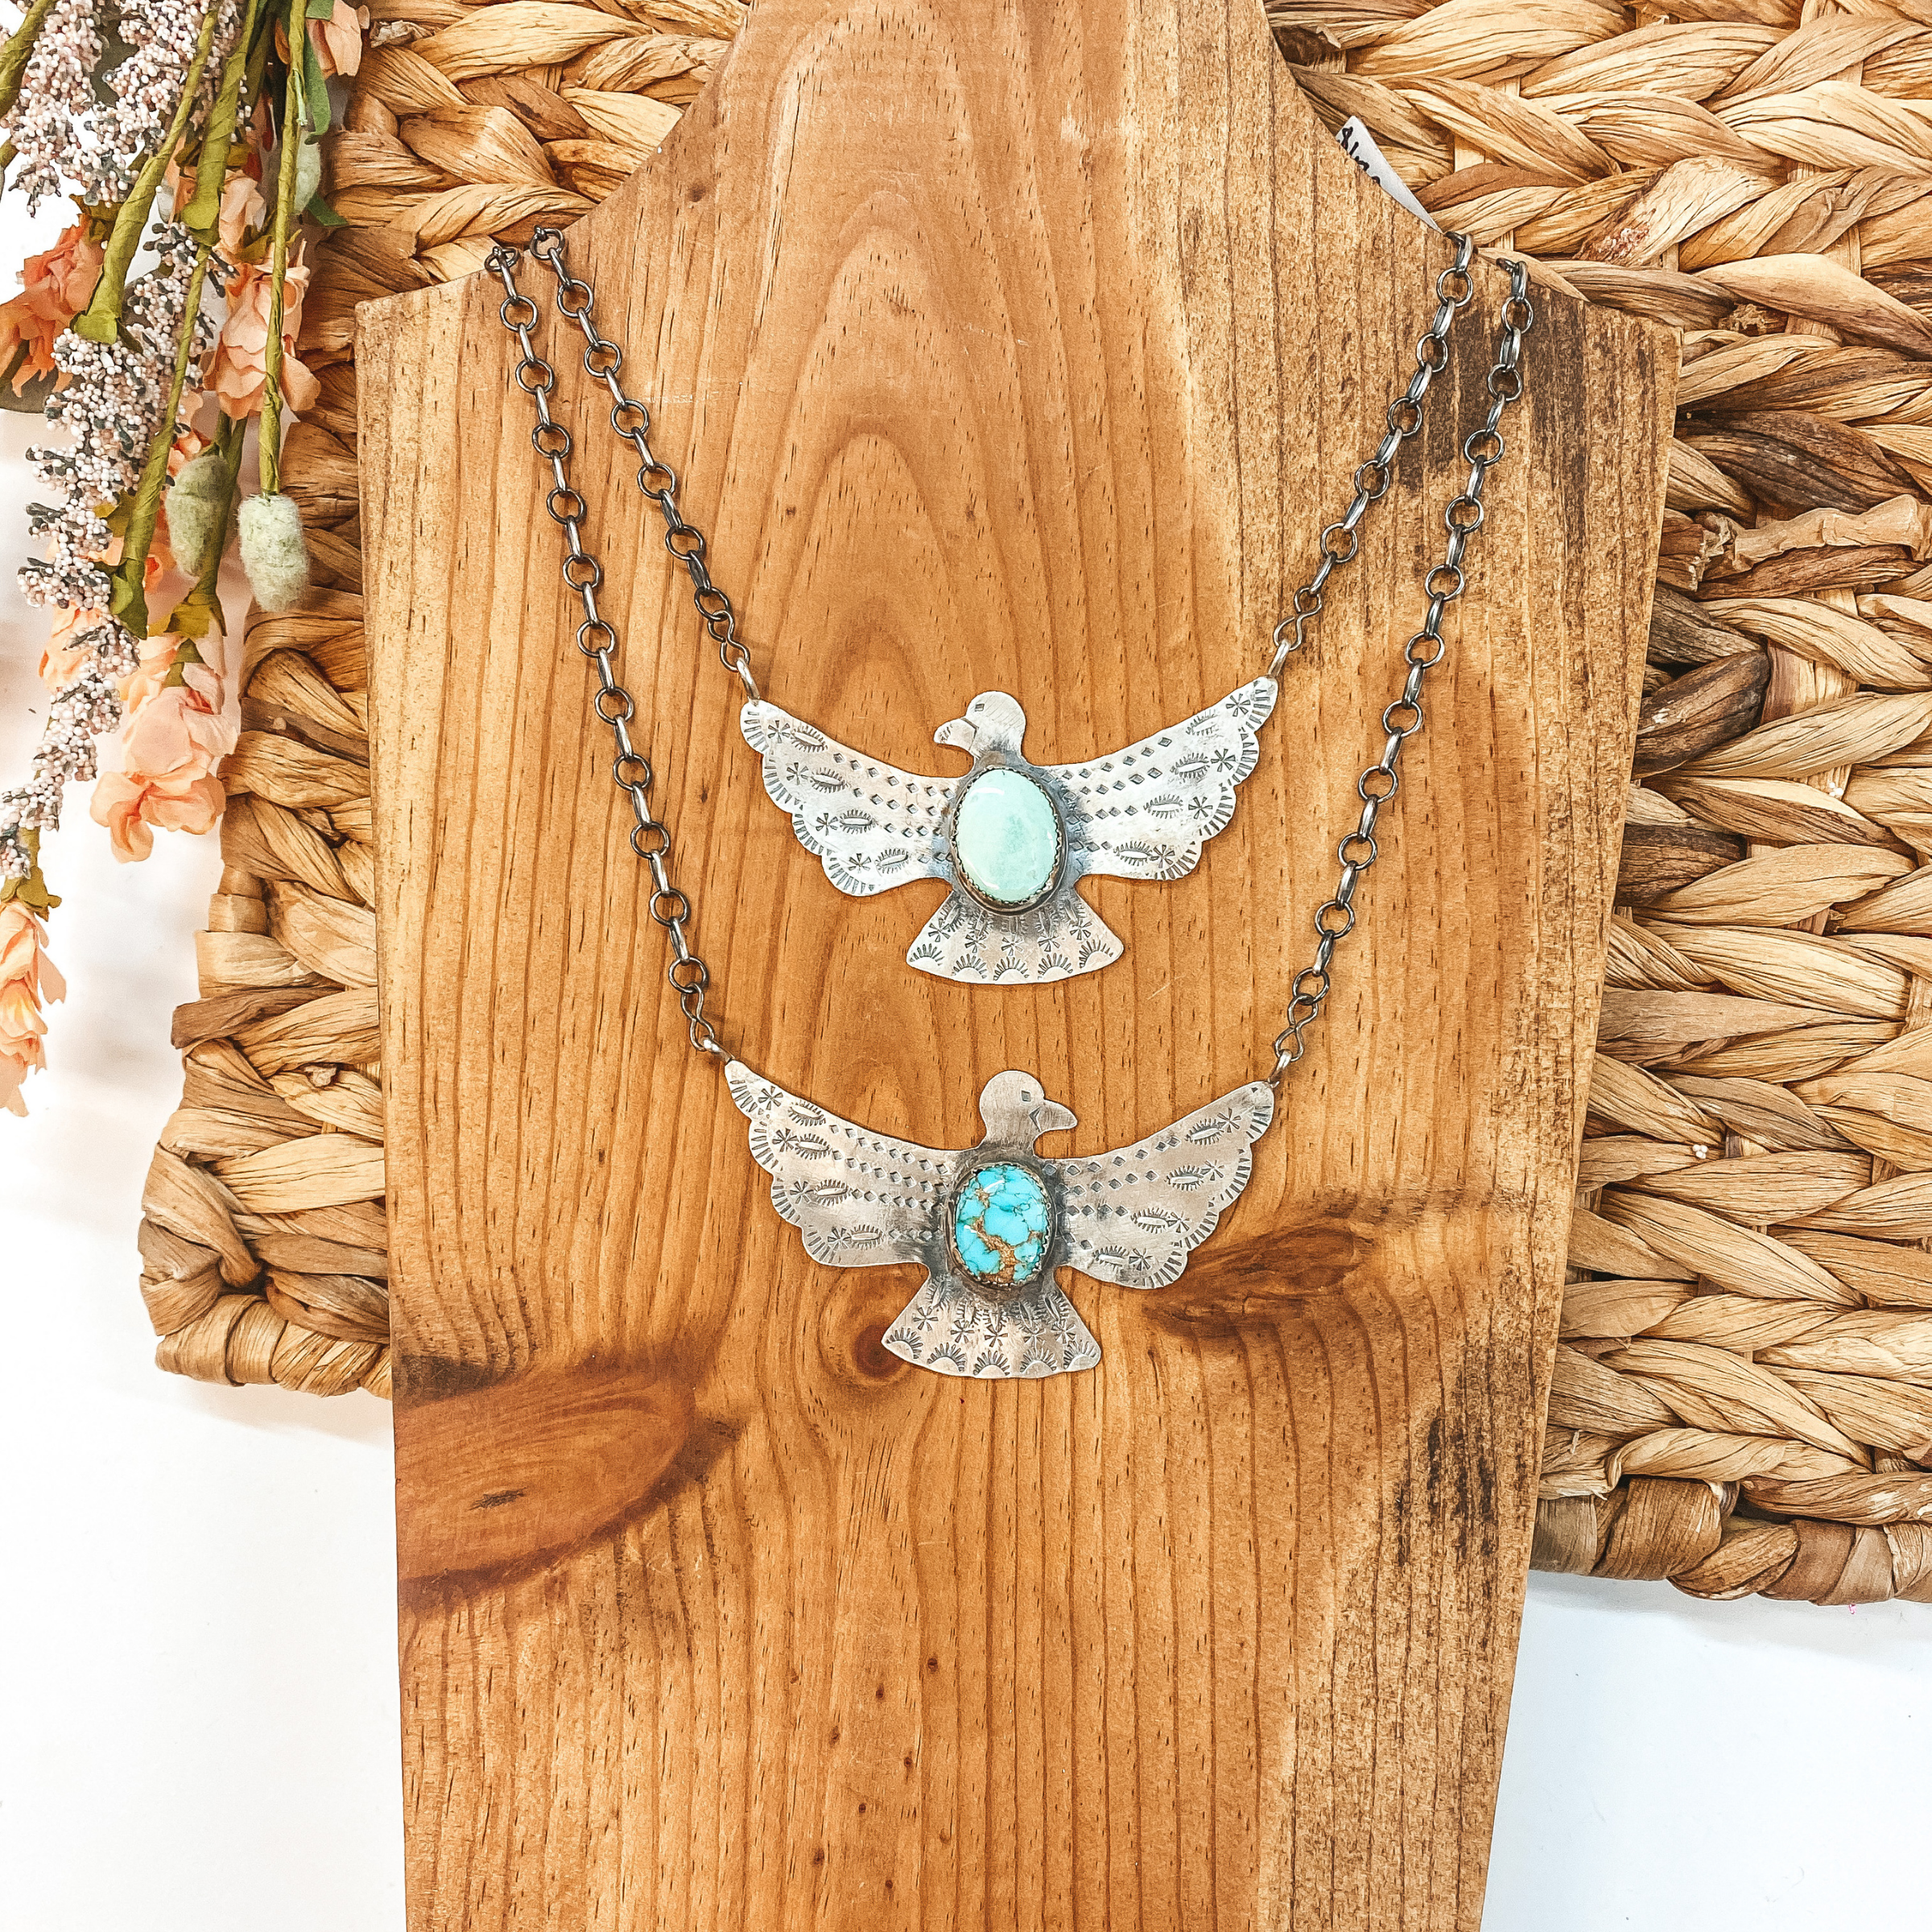 Tim Yazzie |  Navajo Handmade Sterling Silver Thunderbird Necklace with Turquoise Stone - Giddy Up Glamour Boutique